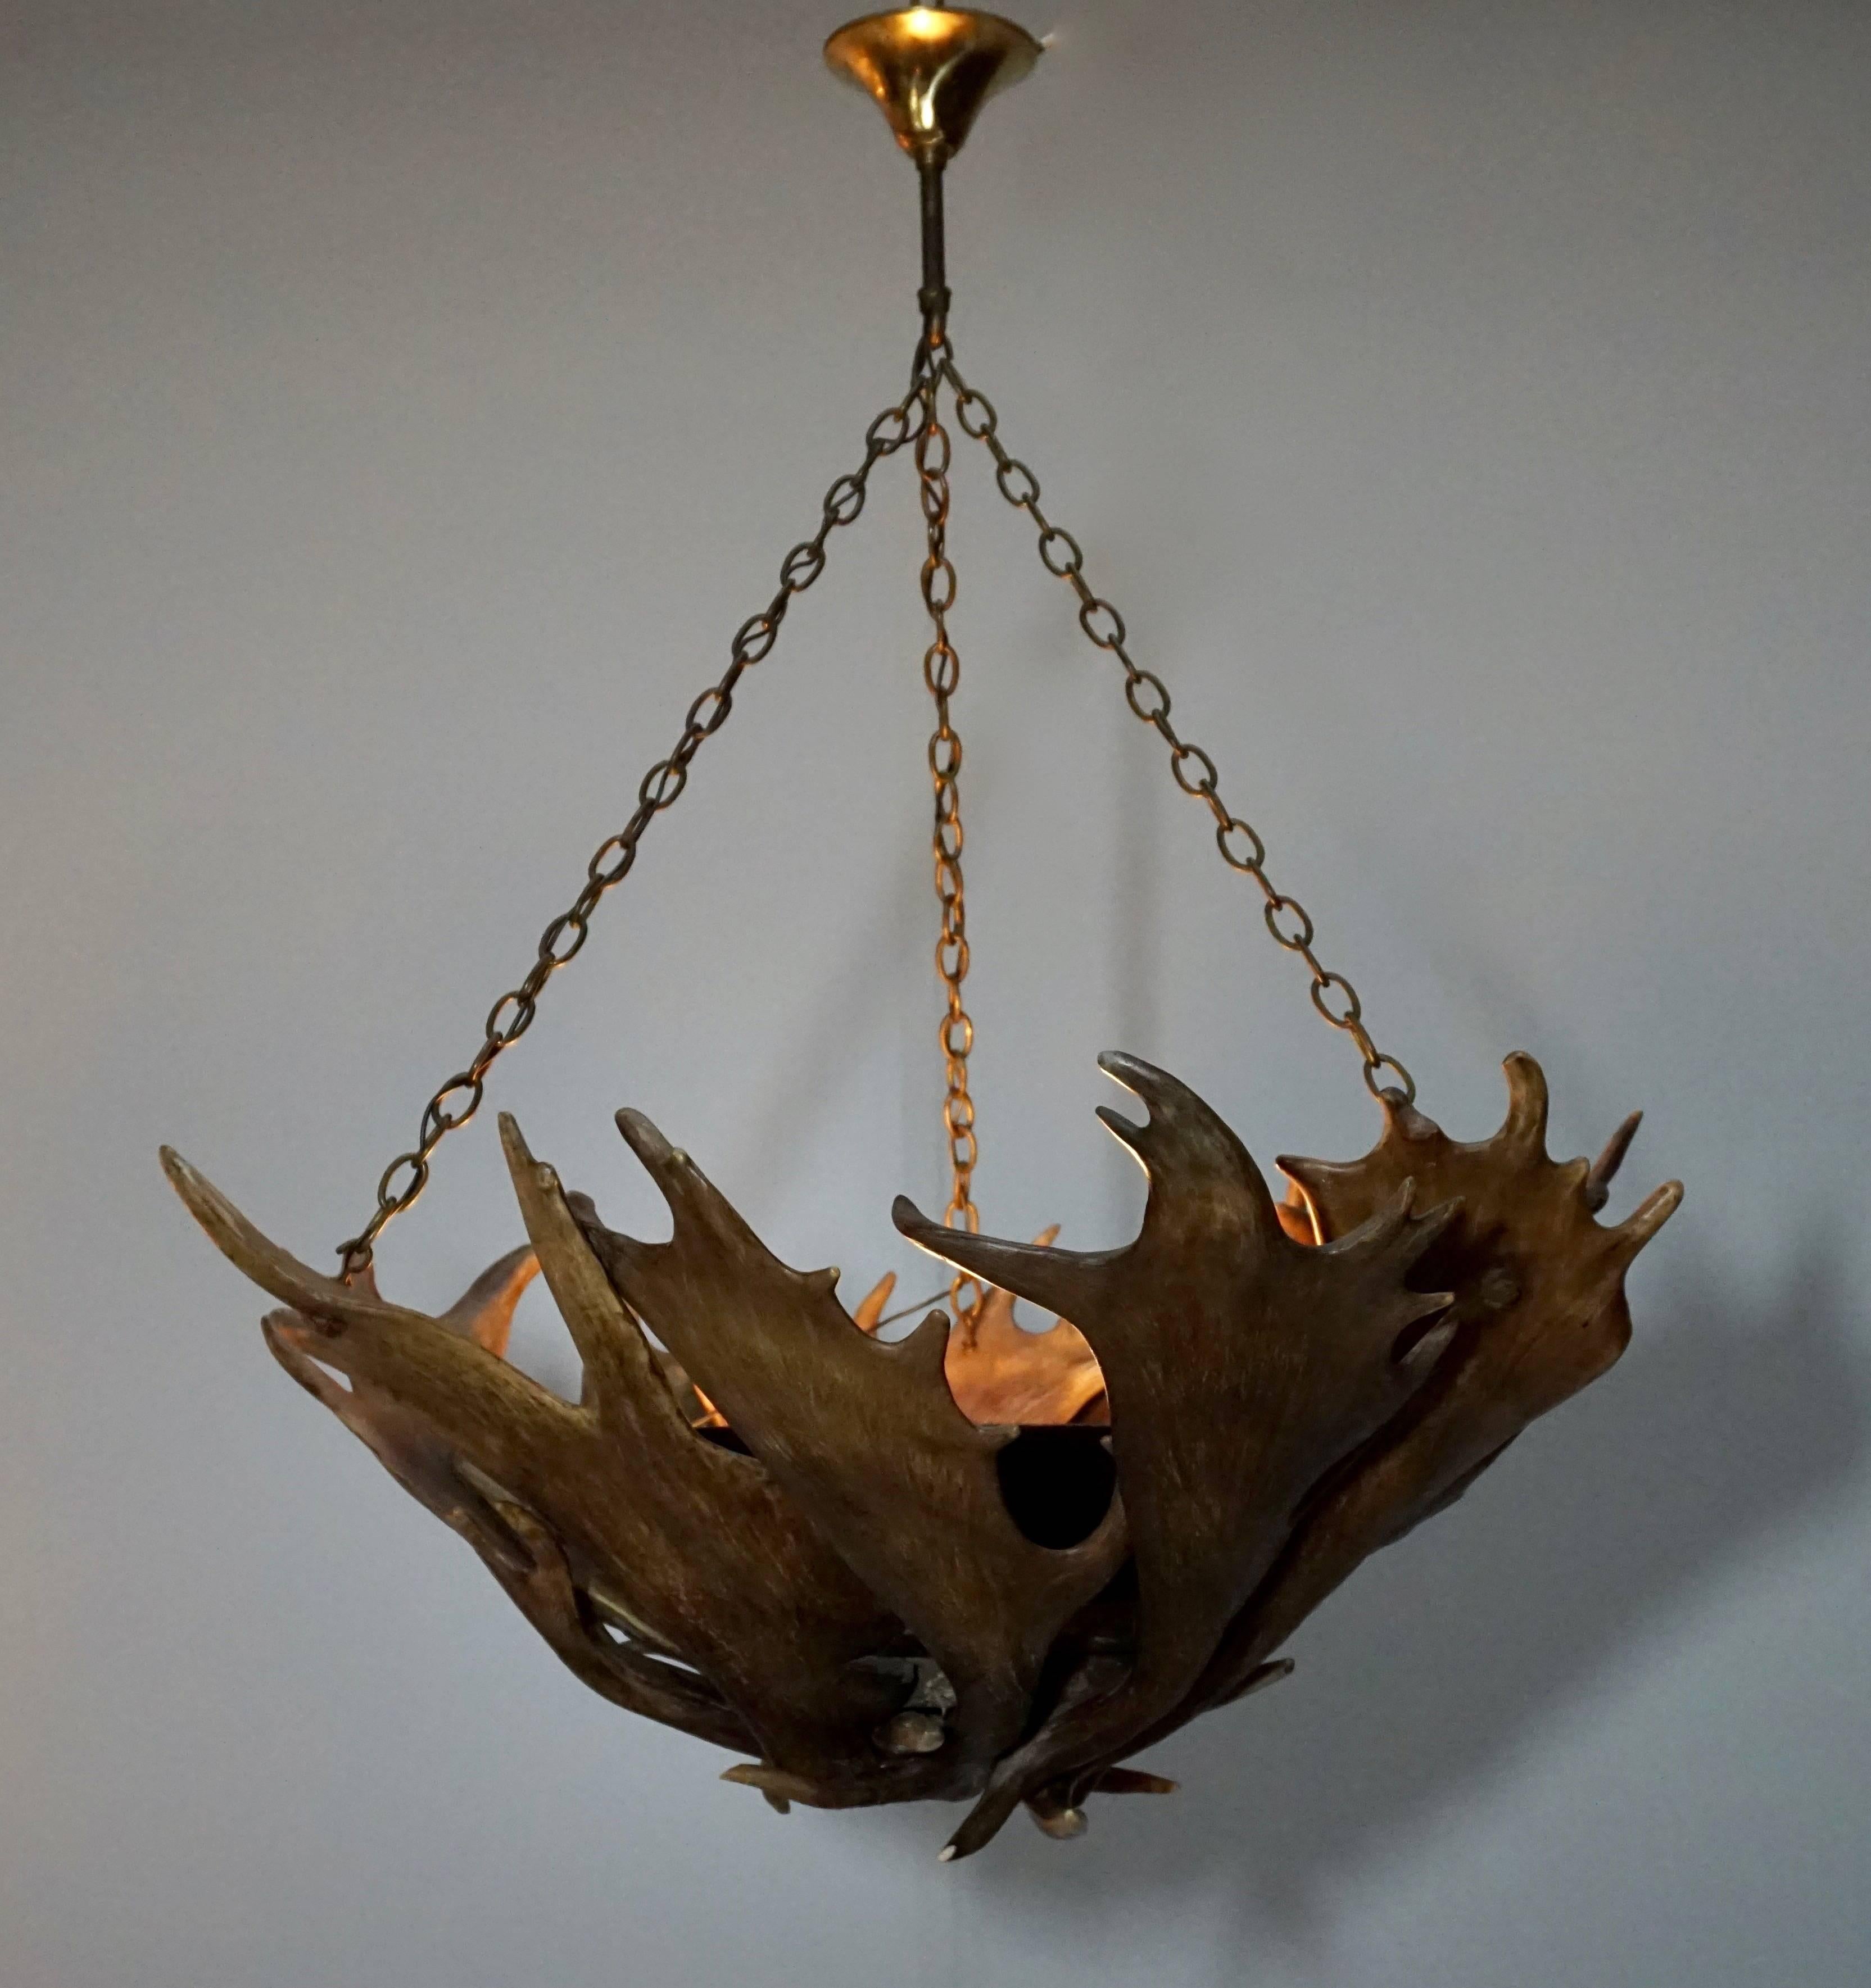 Exclusive lamp made from antlers of fallow deer.
Measures: Diameter 67 cm.
height fixture 27 cm.
Total height 80 cm.
One E27 bulb.